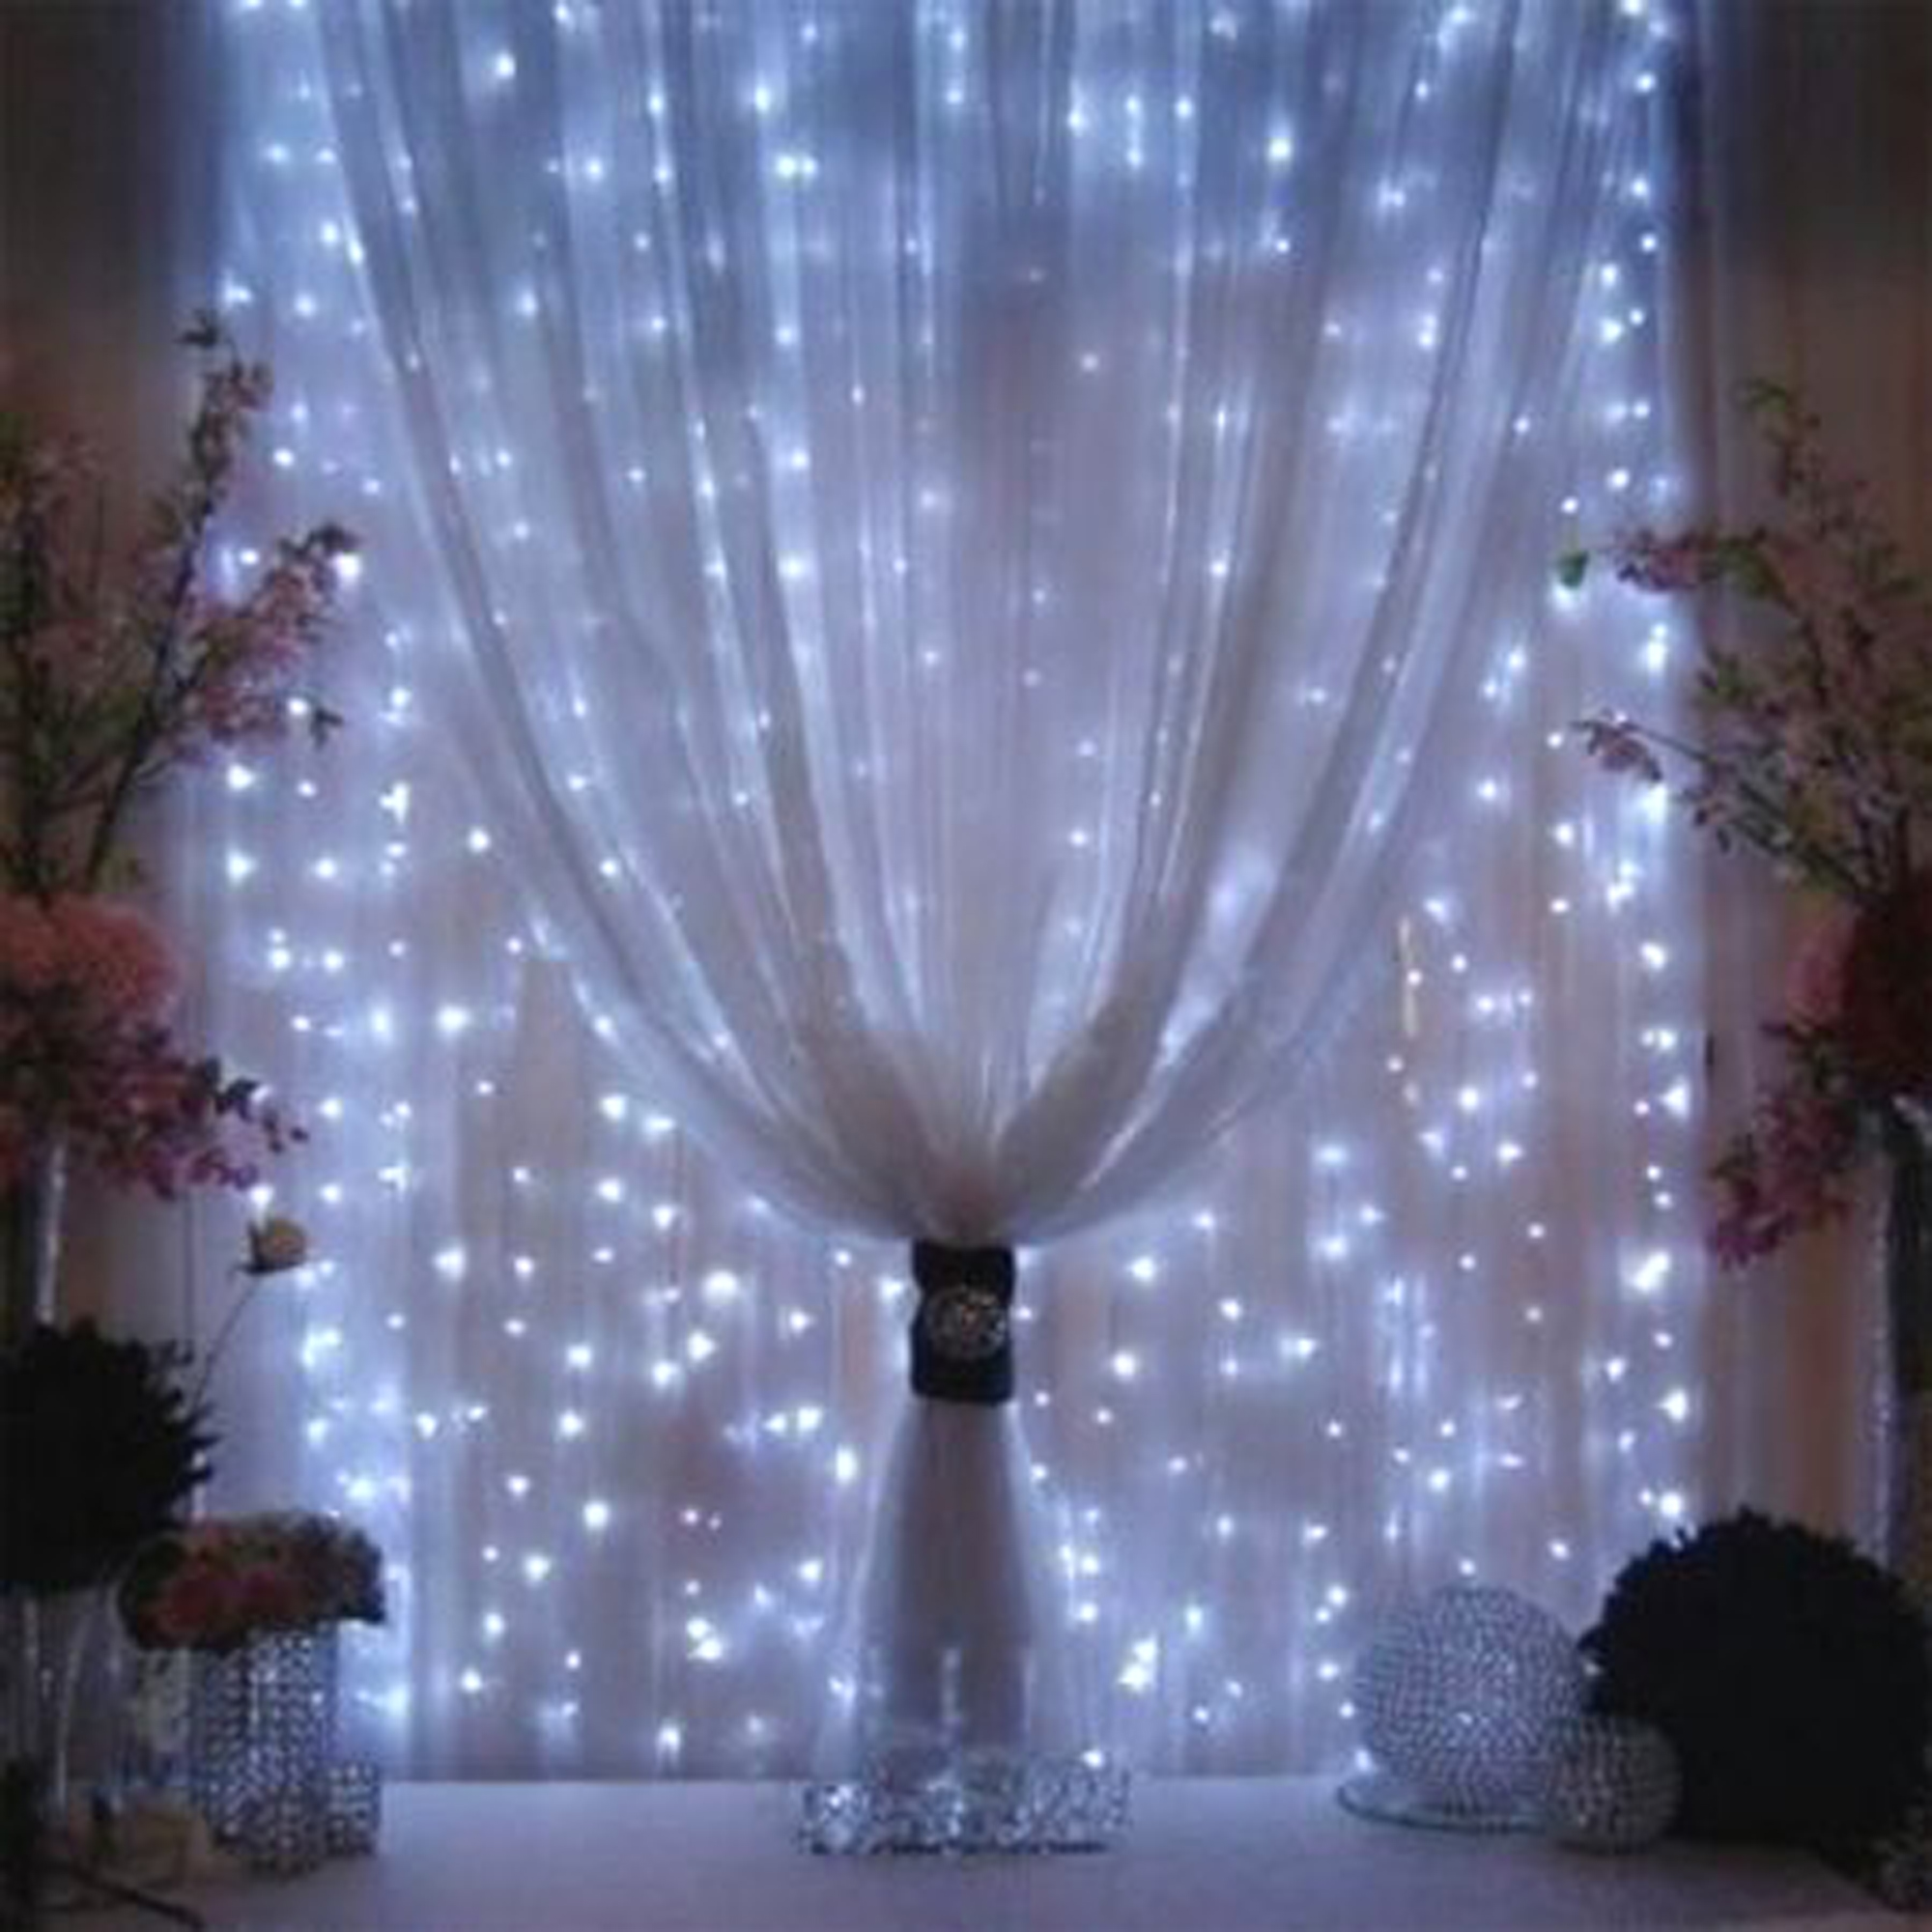 3Mx3M 300LED String Light Curtain Light for Christmas Xmas Wedding Party Home Decoration - White - image 3 of 13